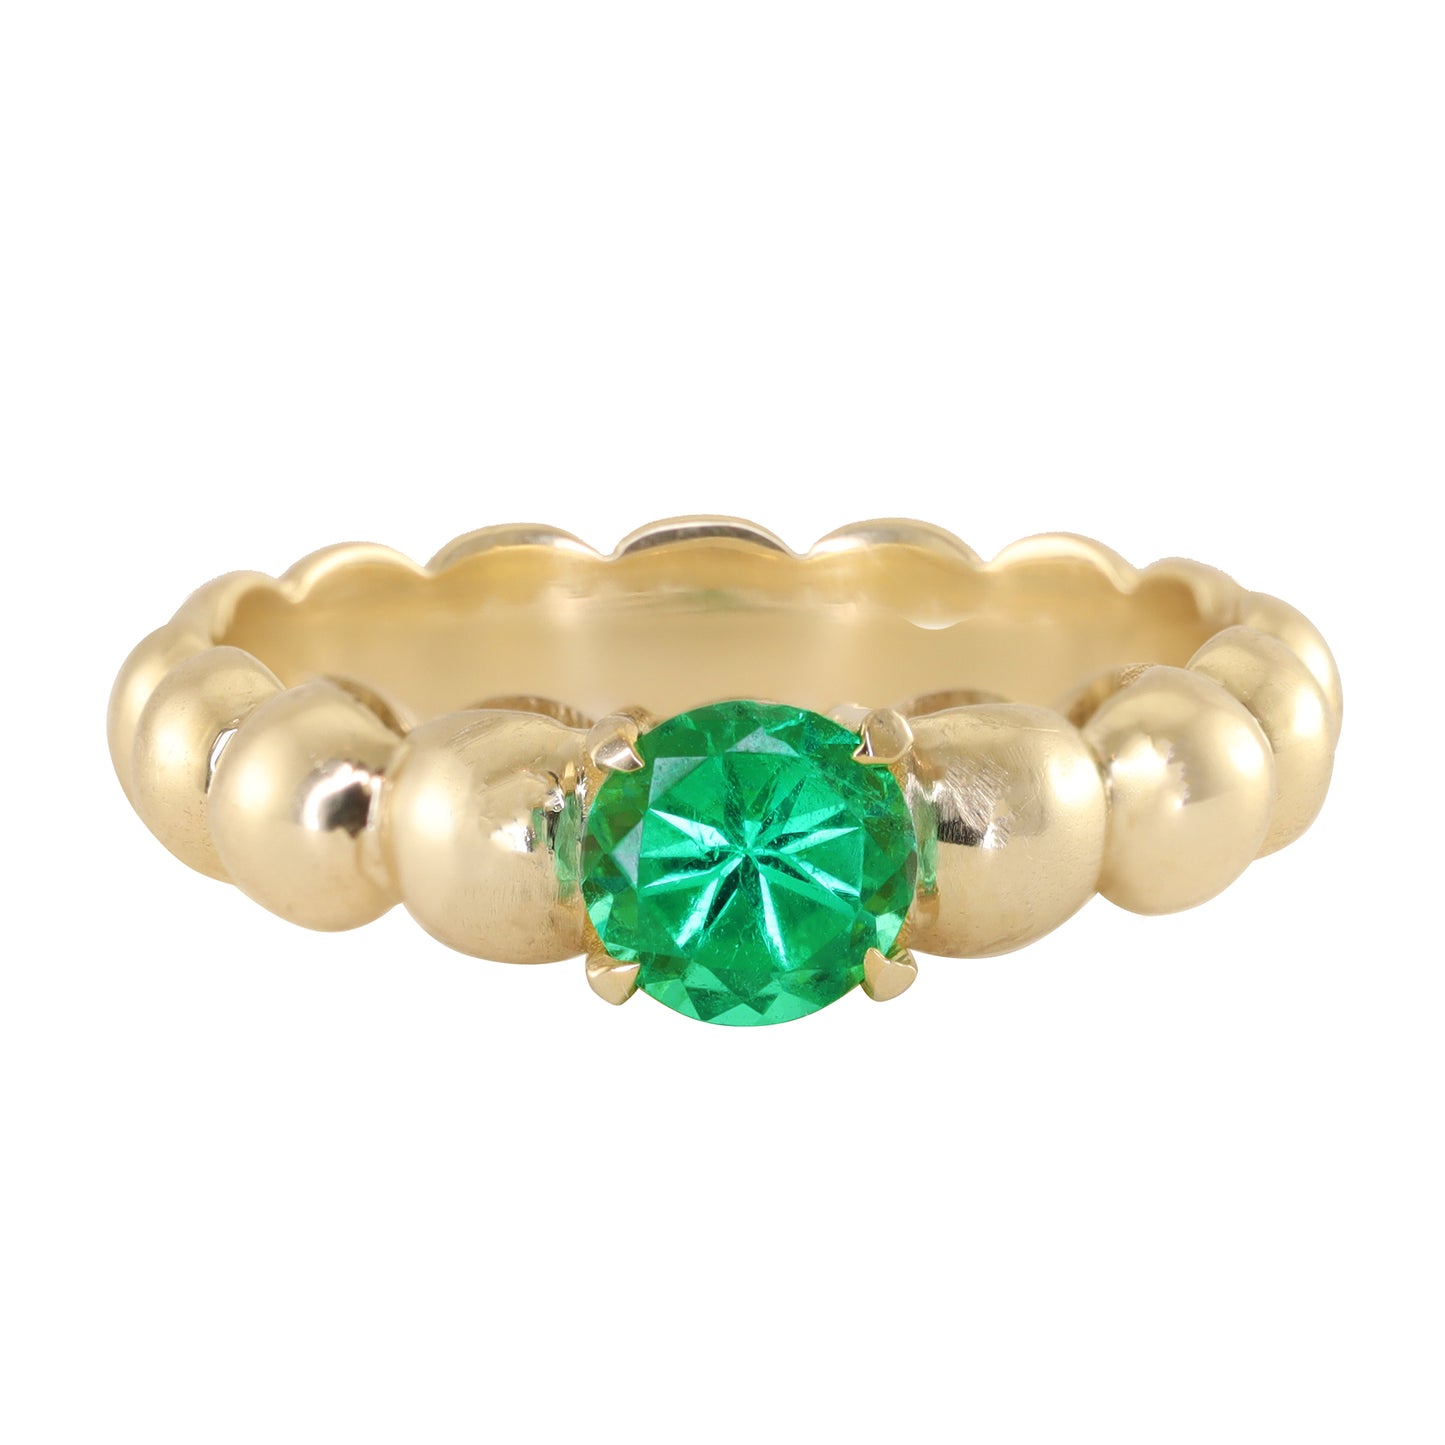 14kt gold solitaire emerald bead ring